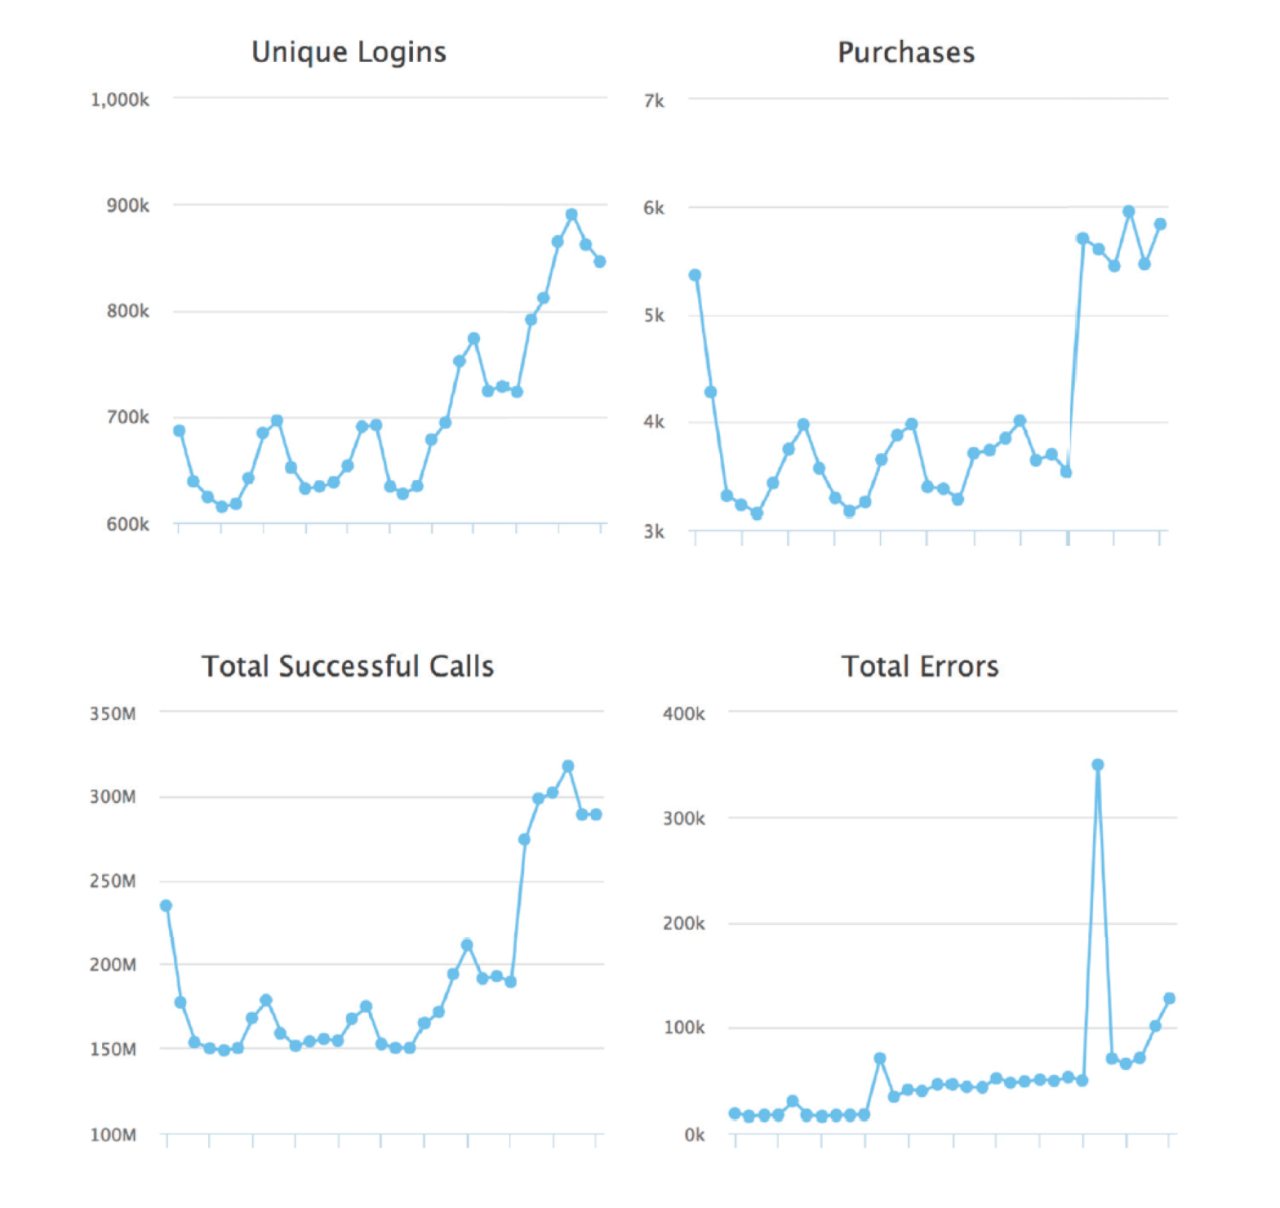 4 line charts showing a game's unique logins, purchases, total successful calls, and total errors